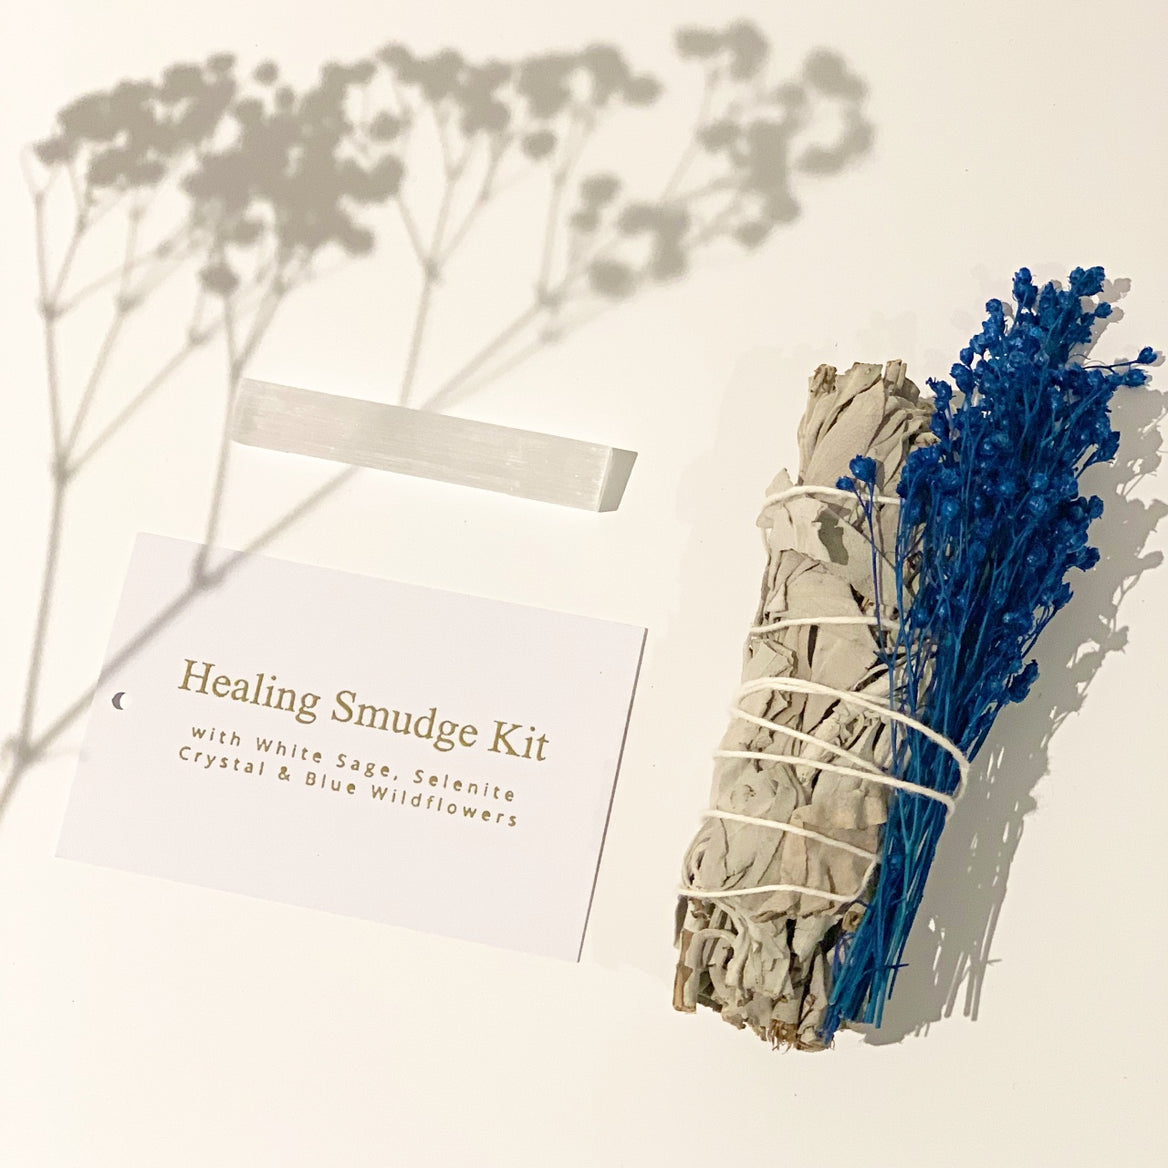 Healing Smudge Kit - White Sage Smudge with Selenite & Blue Wildflowers